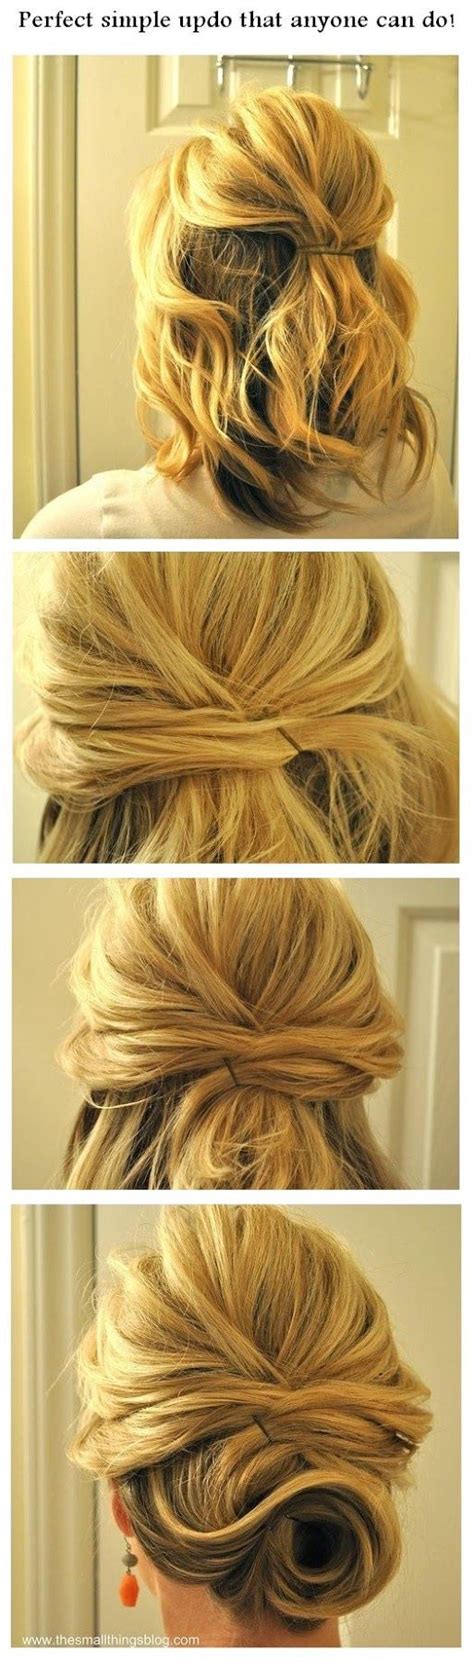 With music festival season just beginning and warmer days. 10 Amazing step-by-step hairstyles for medium-length hair ...